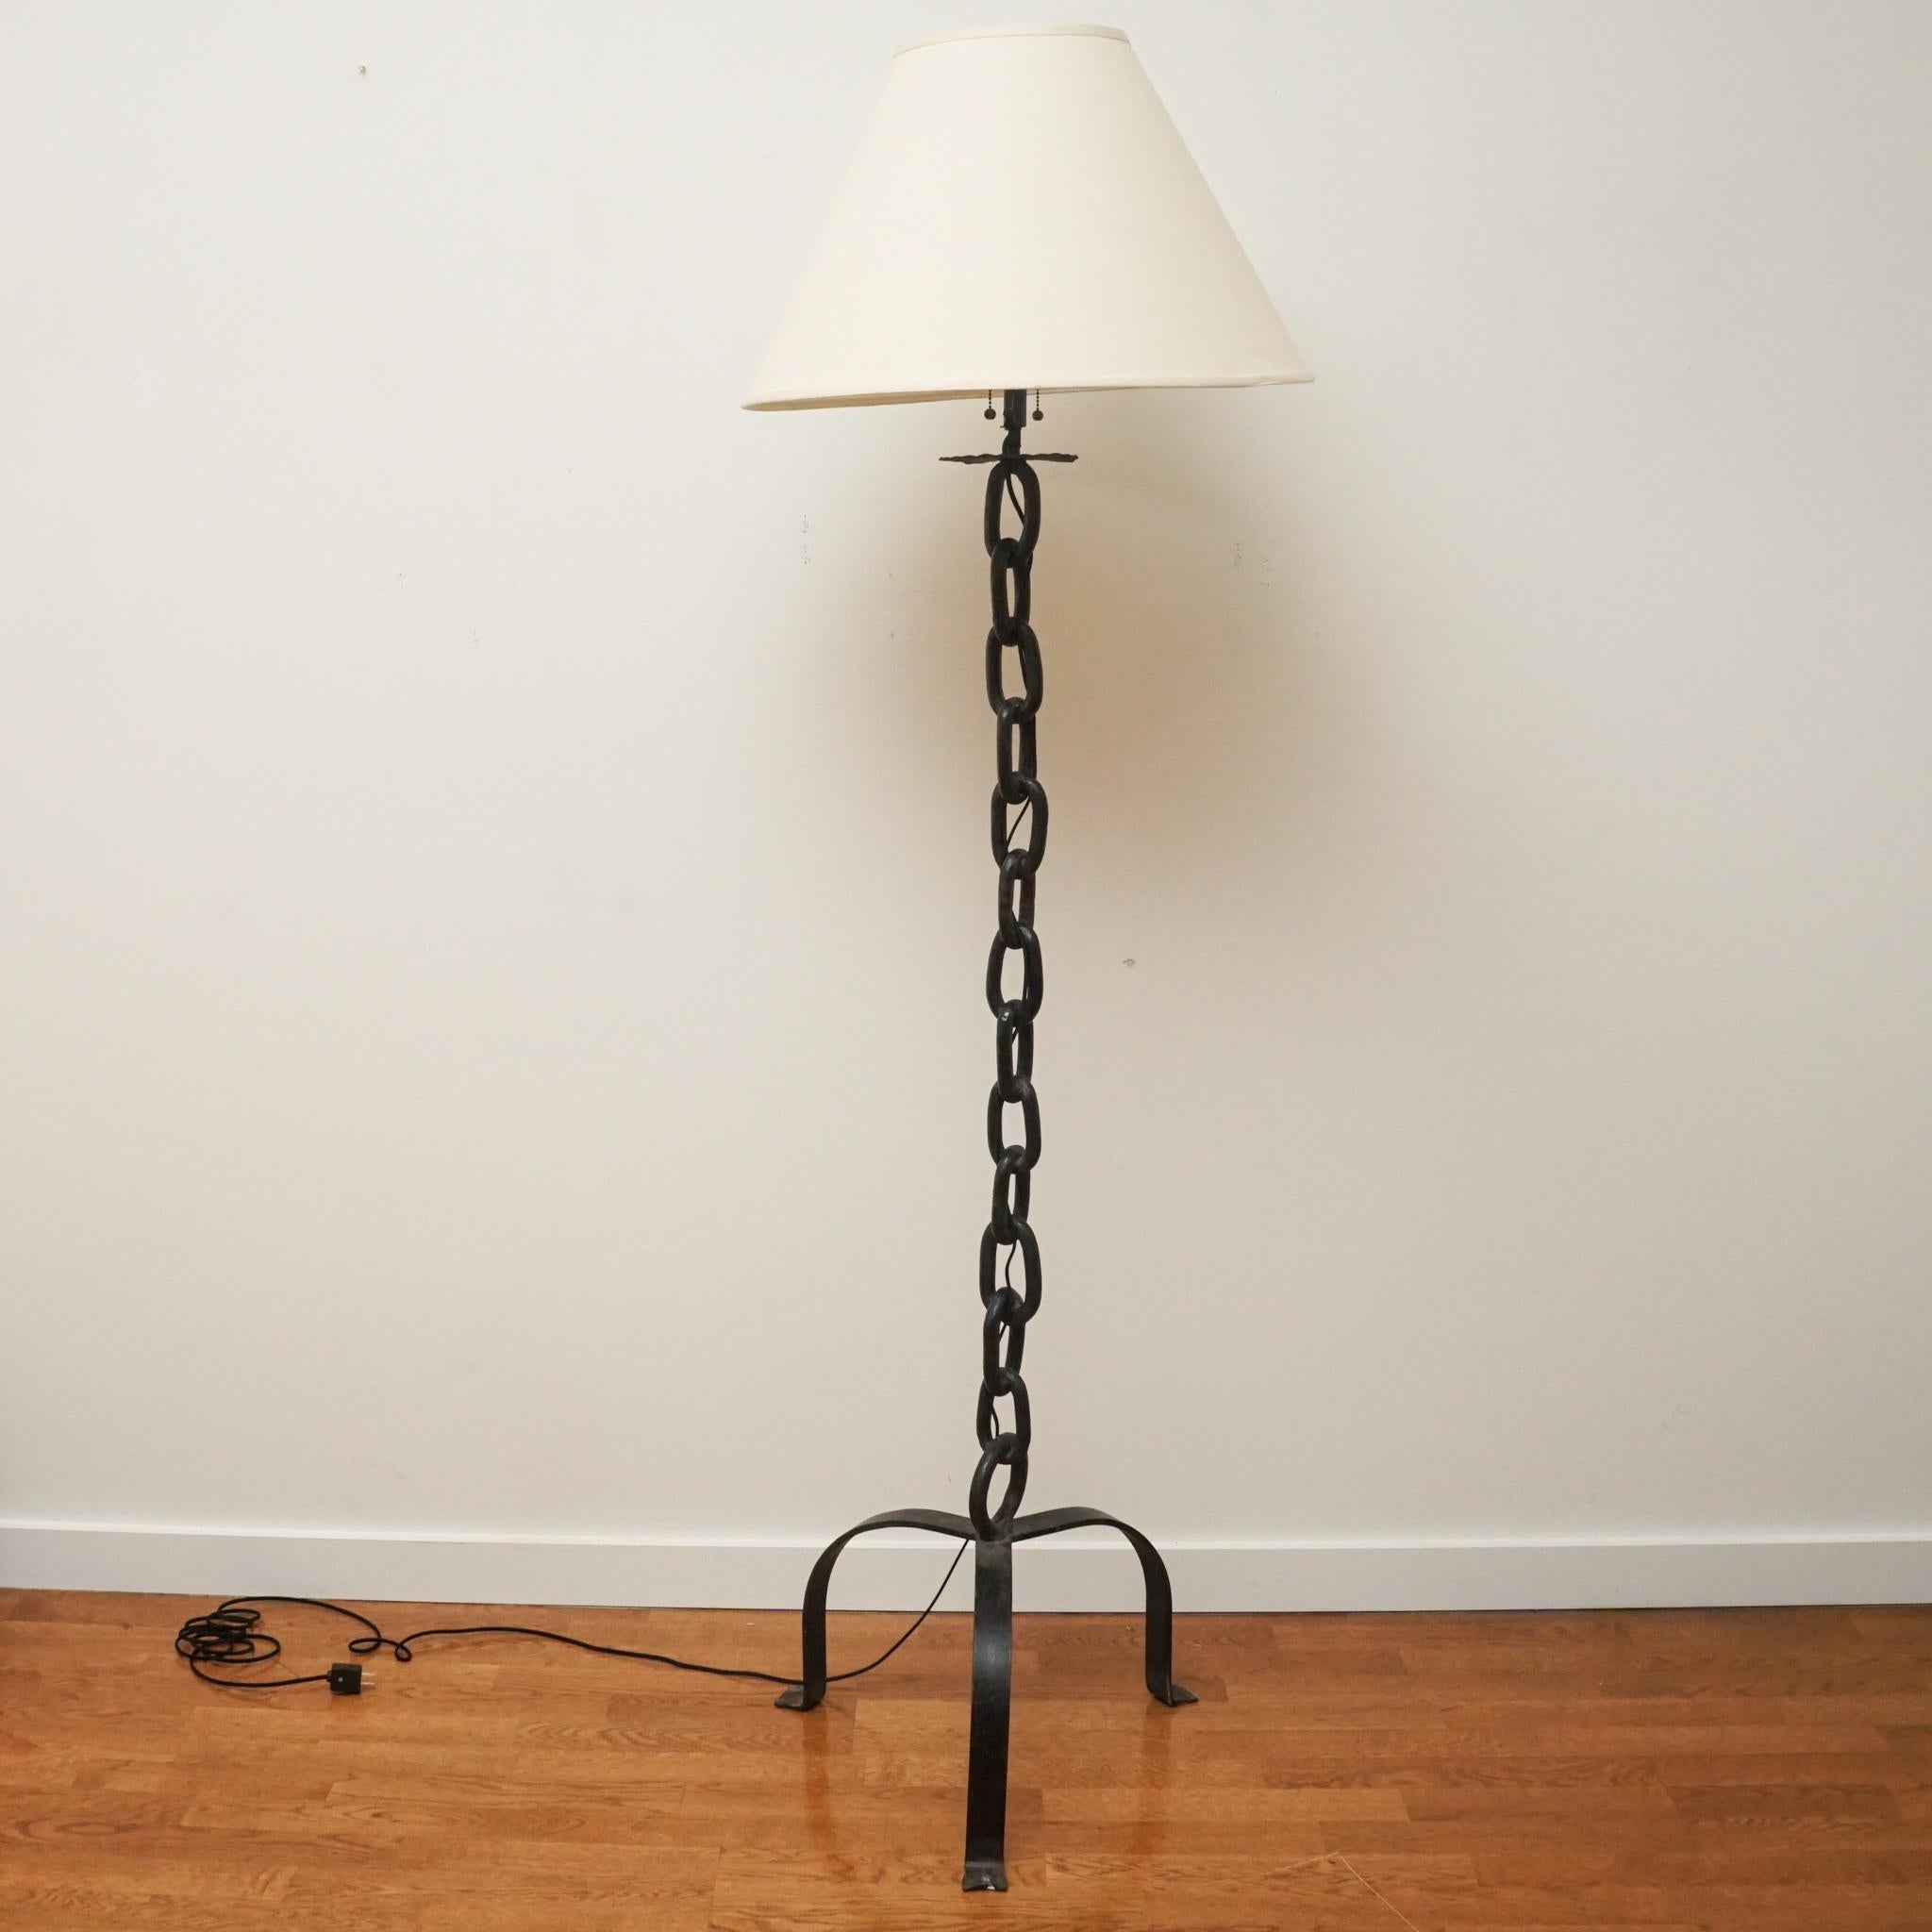 This vintage chain floor lamp was discovered during a Paris buying trip. Made in the 1950s, the vertical welded iron chain links are supported with a tri-pod iron base. The lamp has been rewired and fitted with a two-bulb fixture for maximum light.